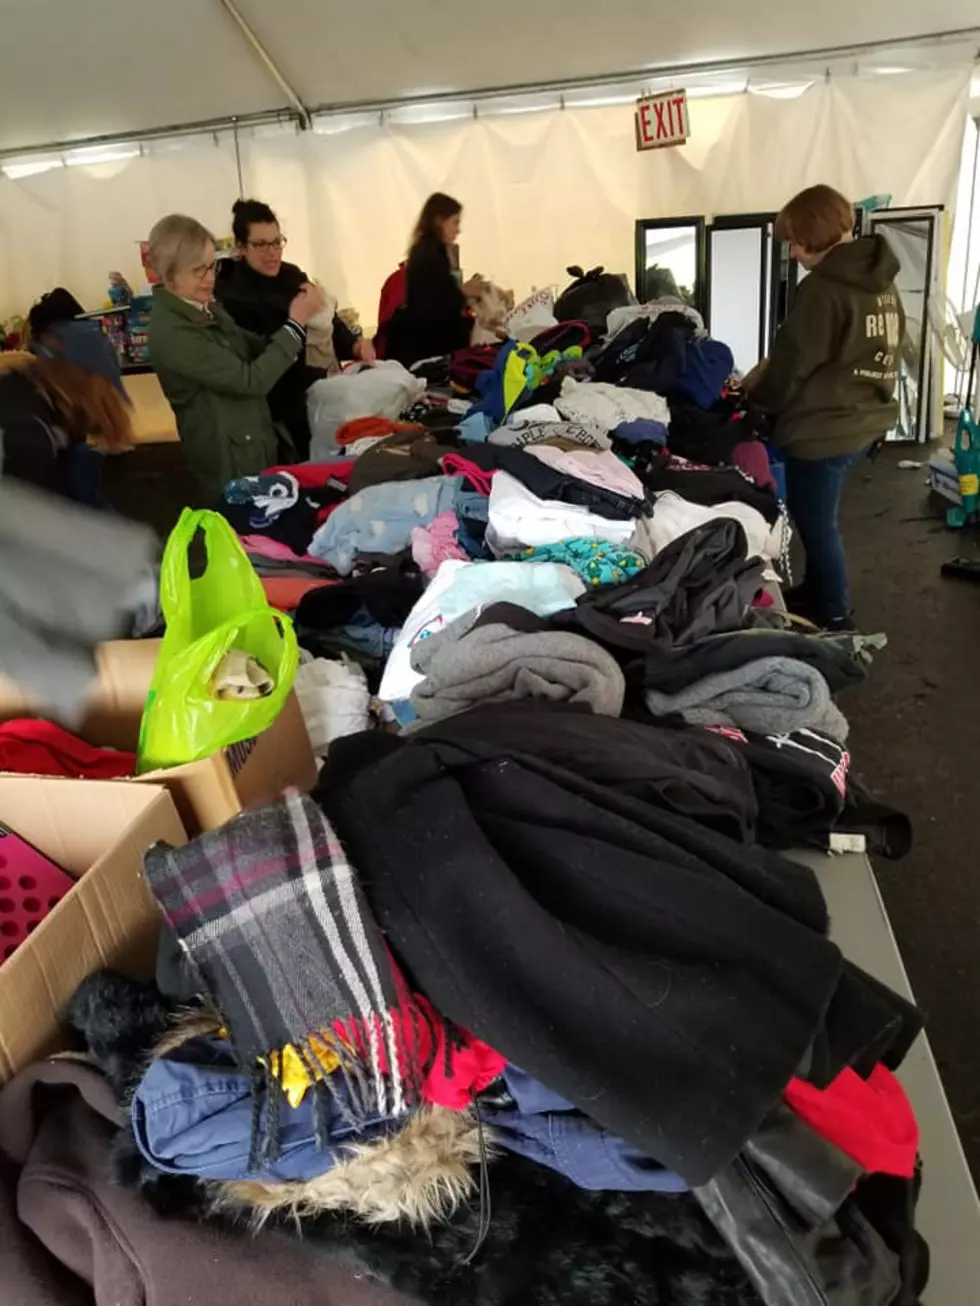 Shop ARC ReUse Center’s Annual SUNY Oneonta Student Move Out Items